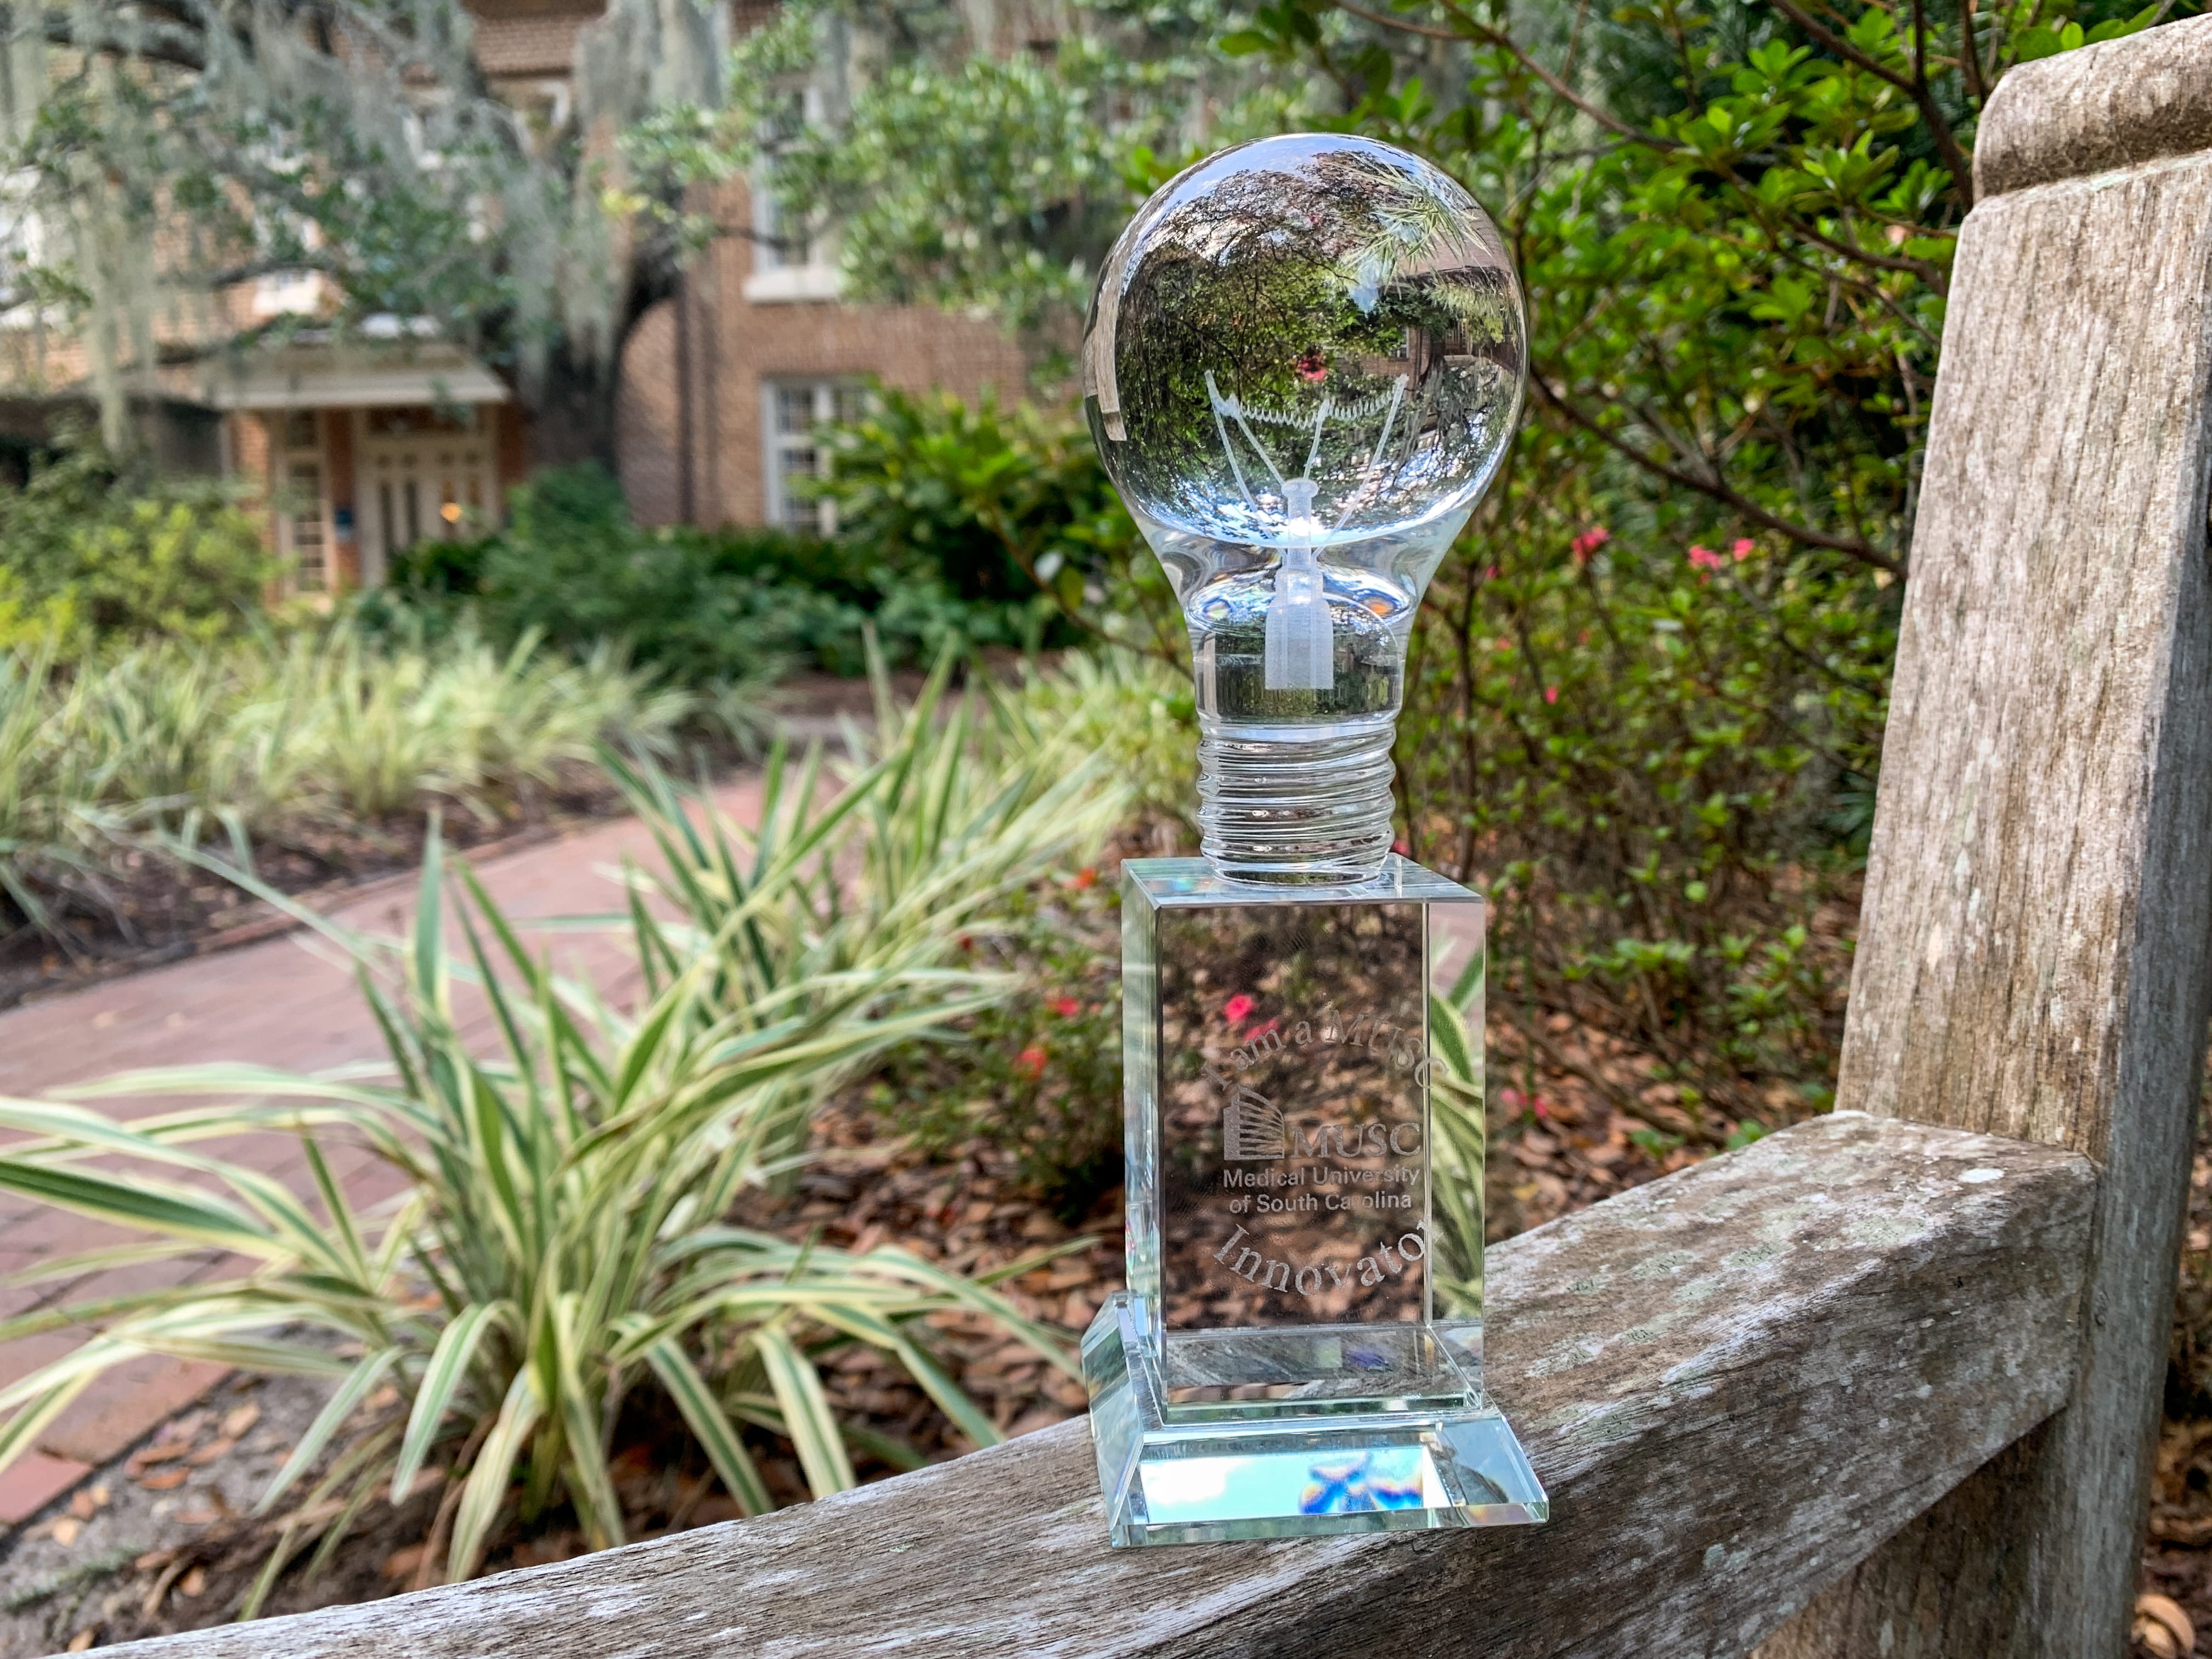 This is the lightbulb representing the I am an MUSC Innovator Award